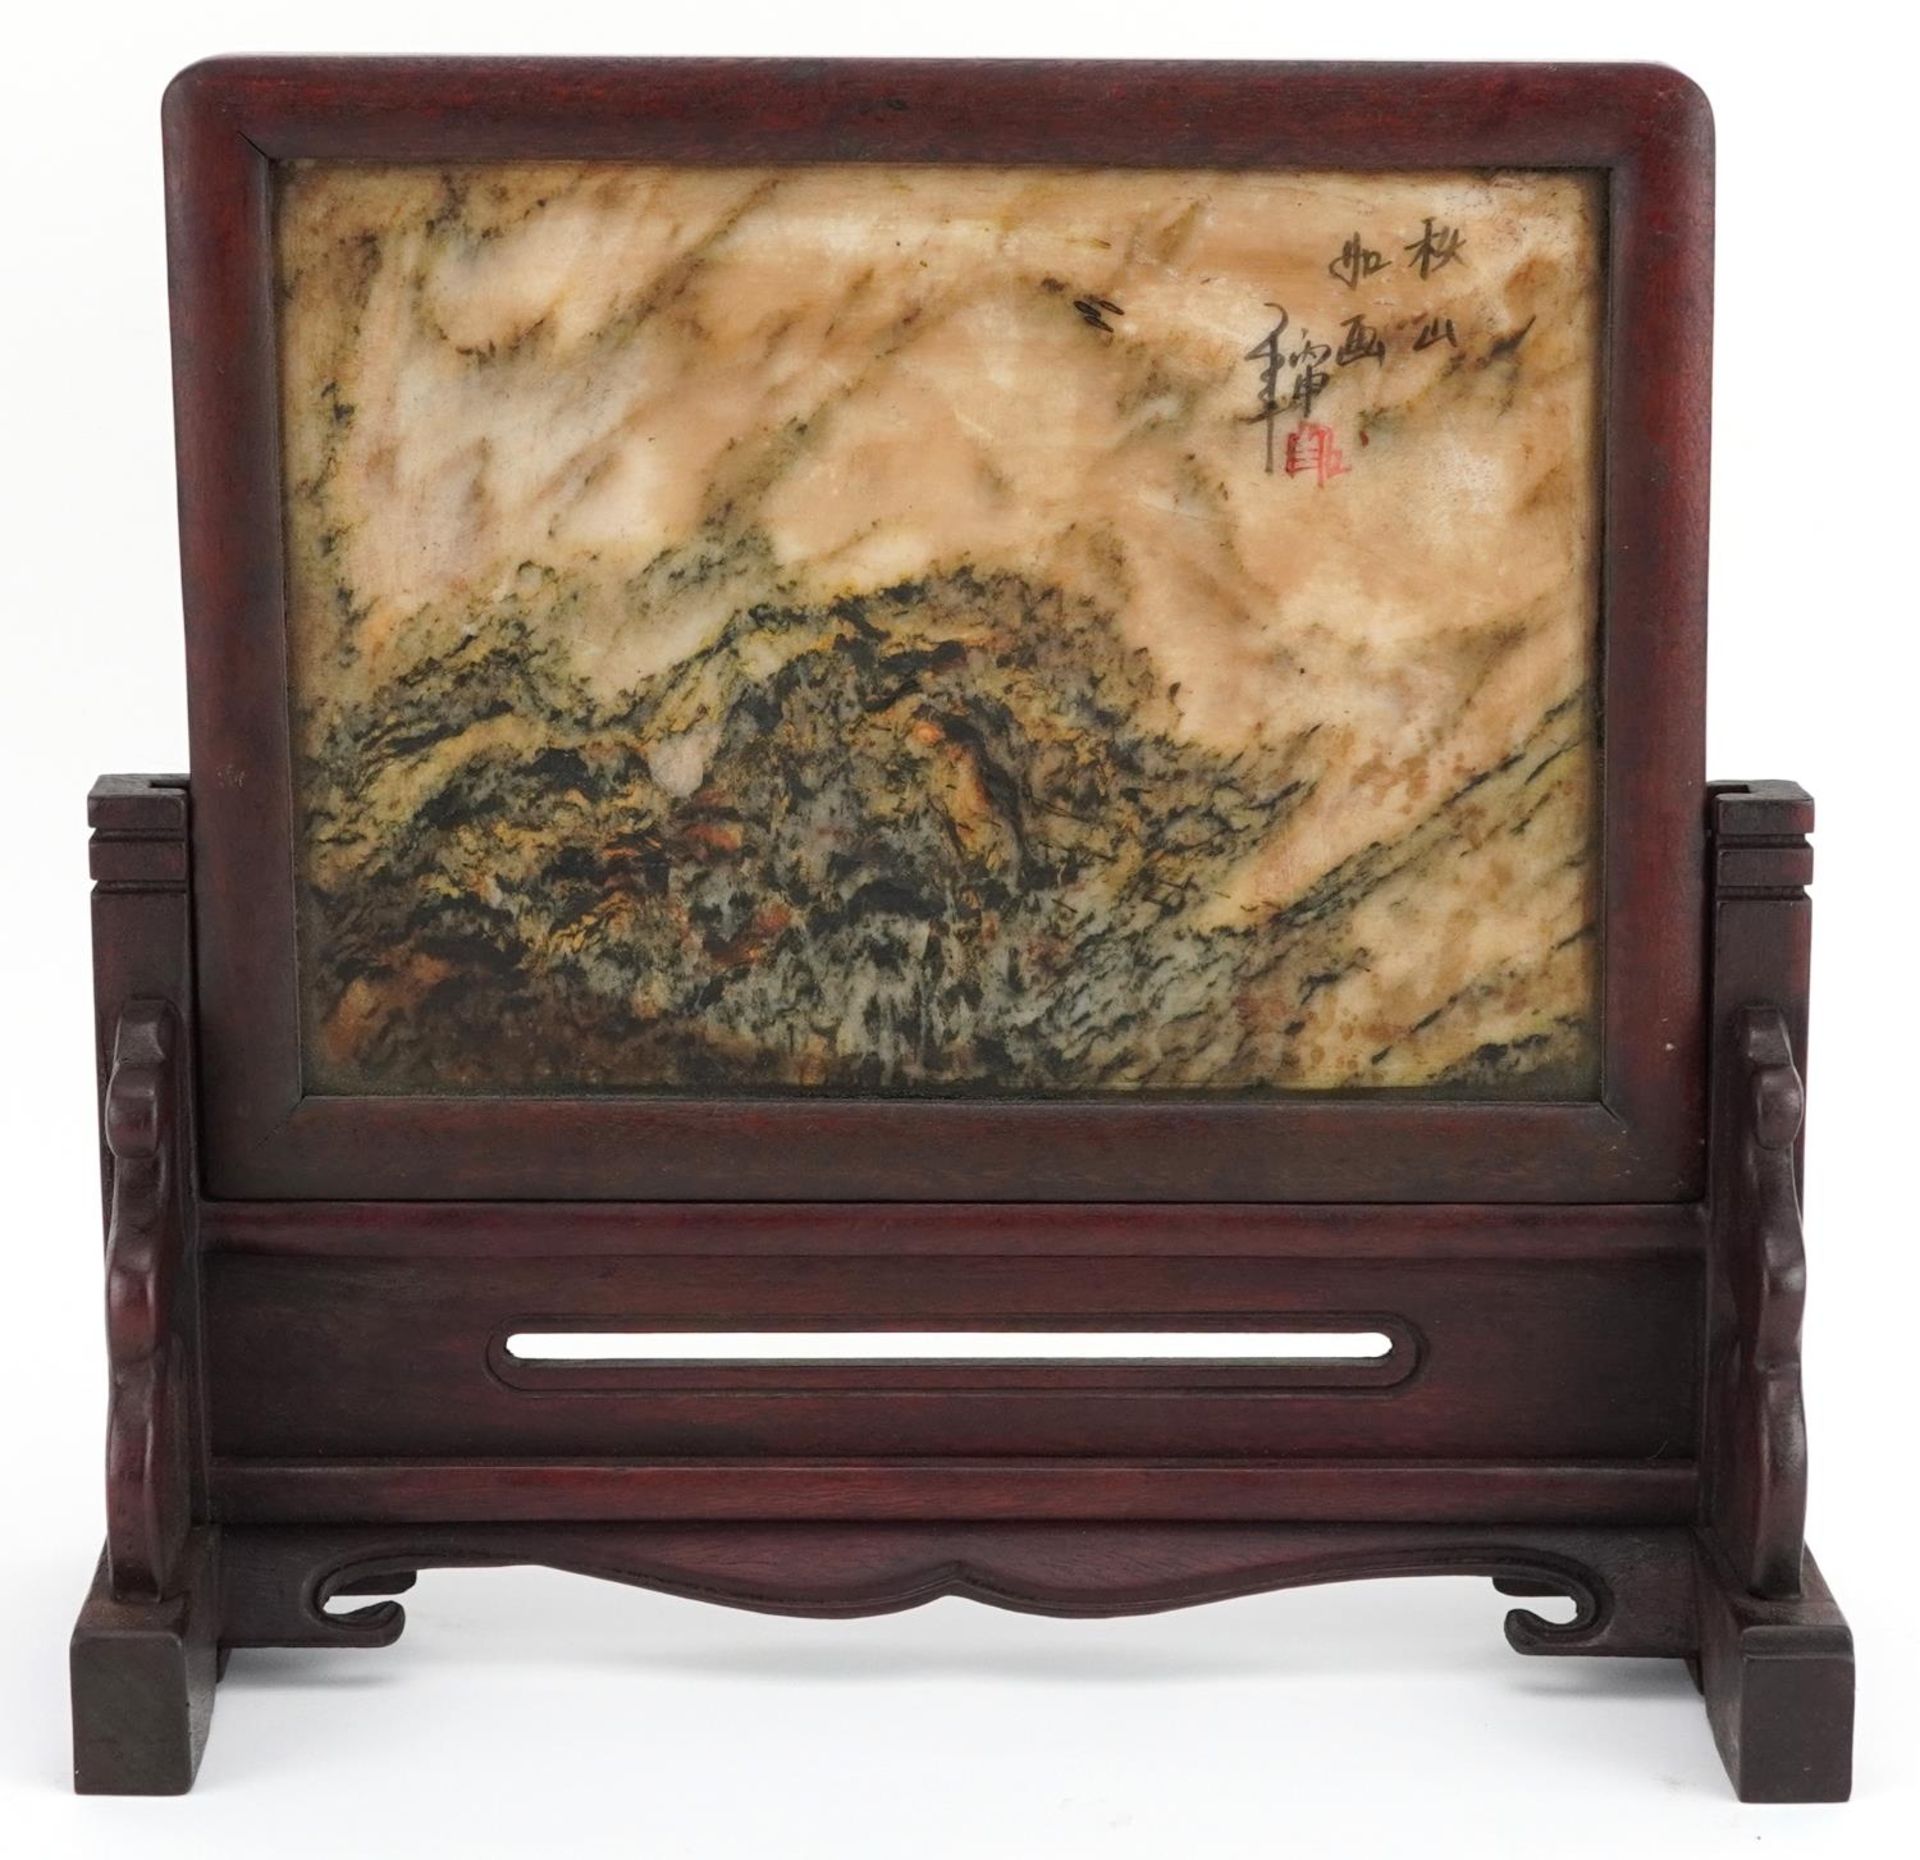 Chinese hardwood table screen with calligraphy and red seal mark, 23cm H x 24cm W x 11cm D : For